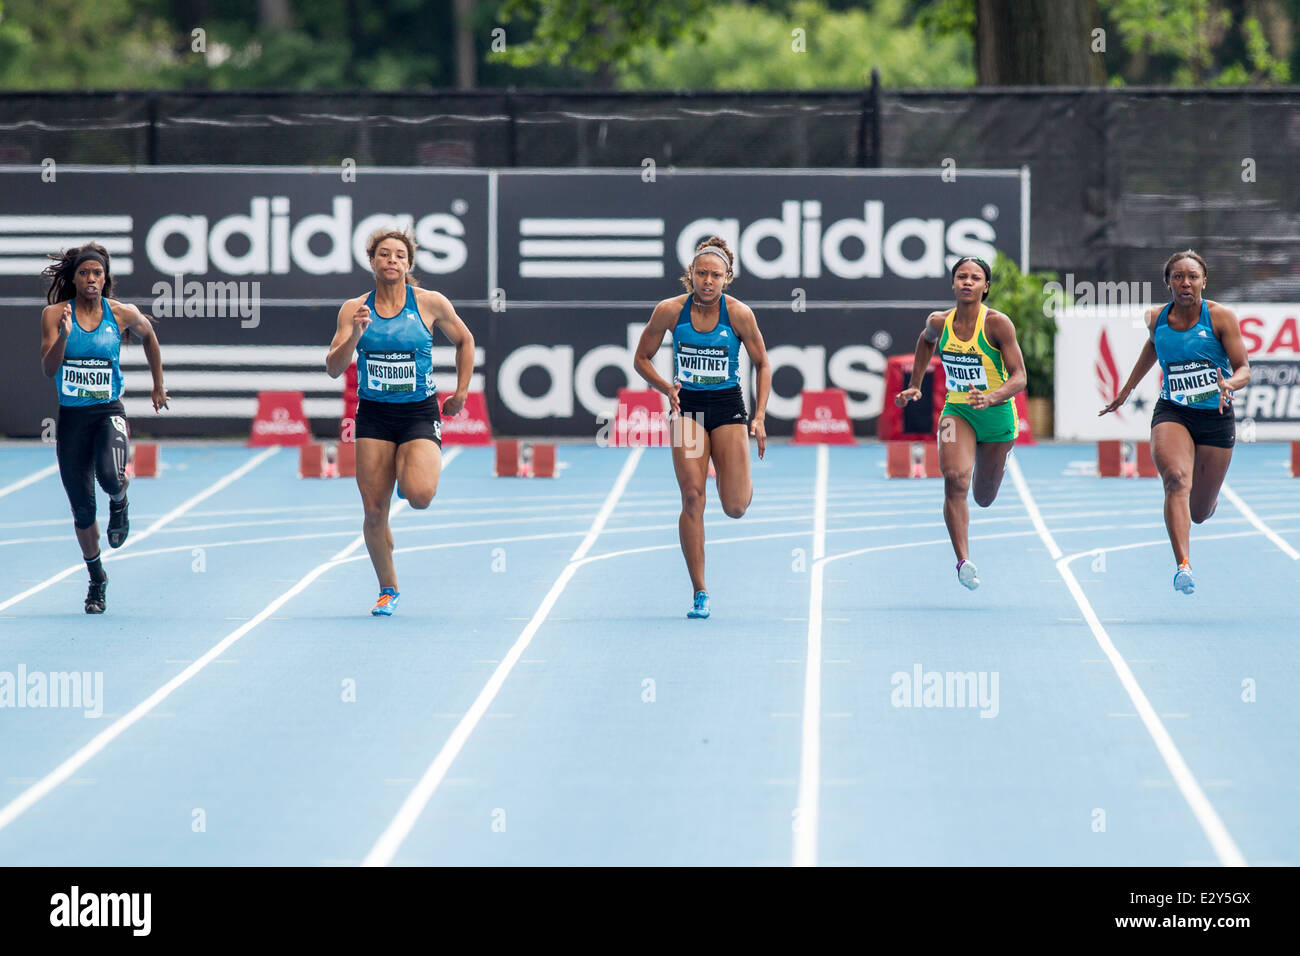 Adidas Girls' Dream 100 at the 2014 Adidas Track and Field Grand Prix Stock  Photo - Alamy